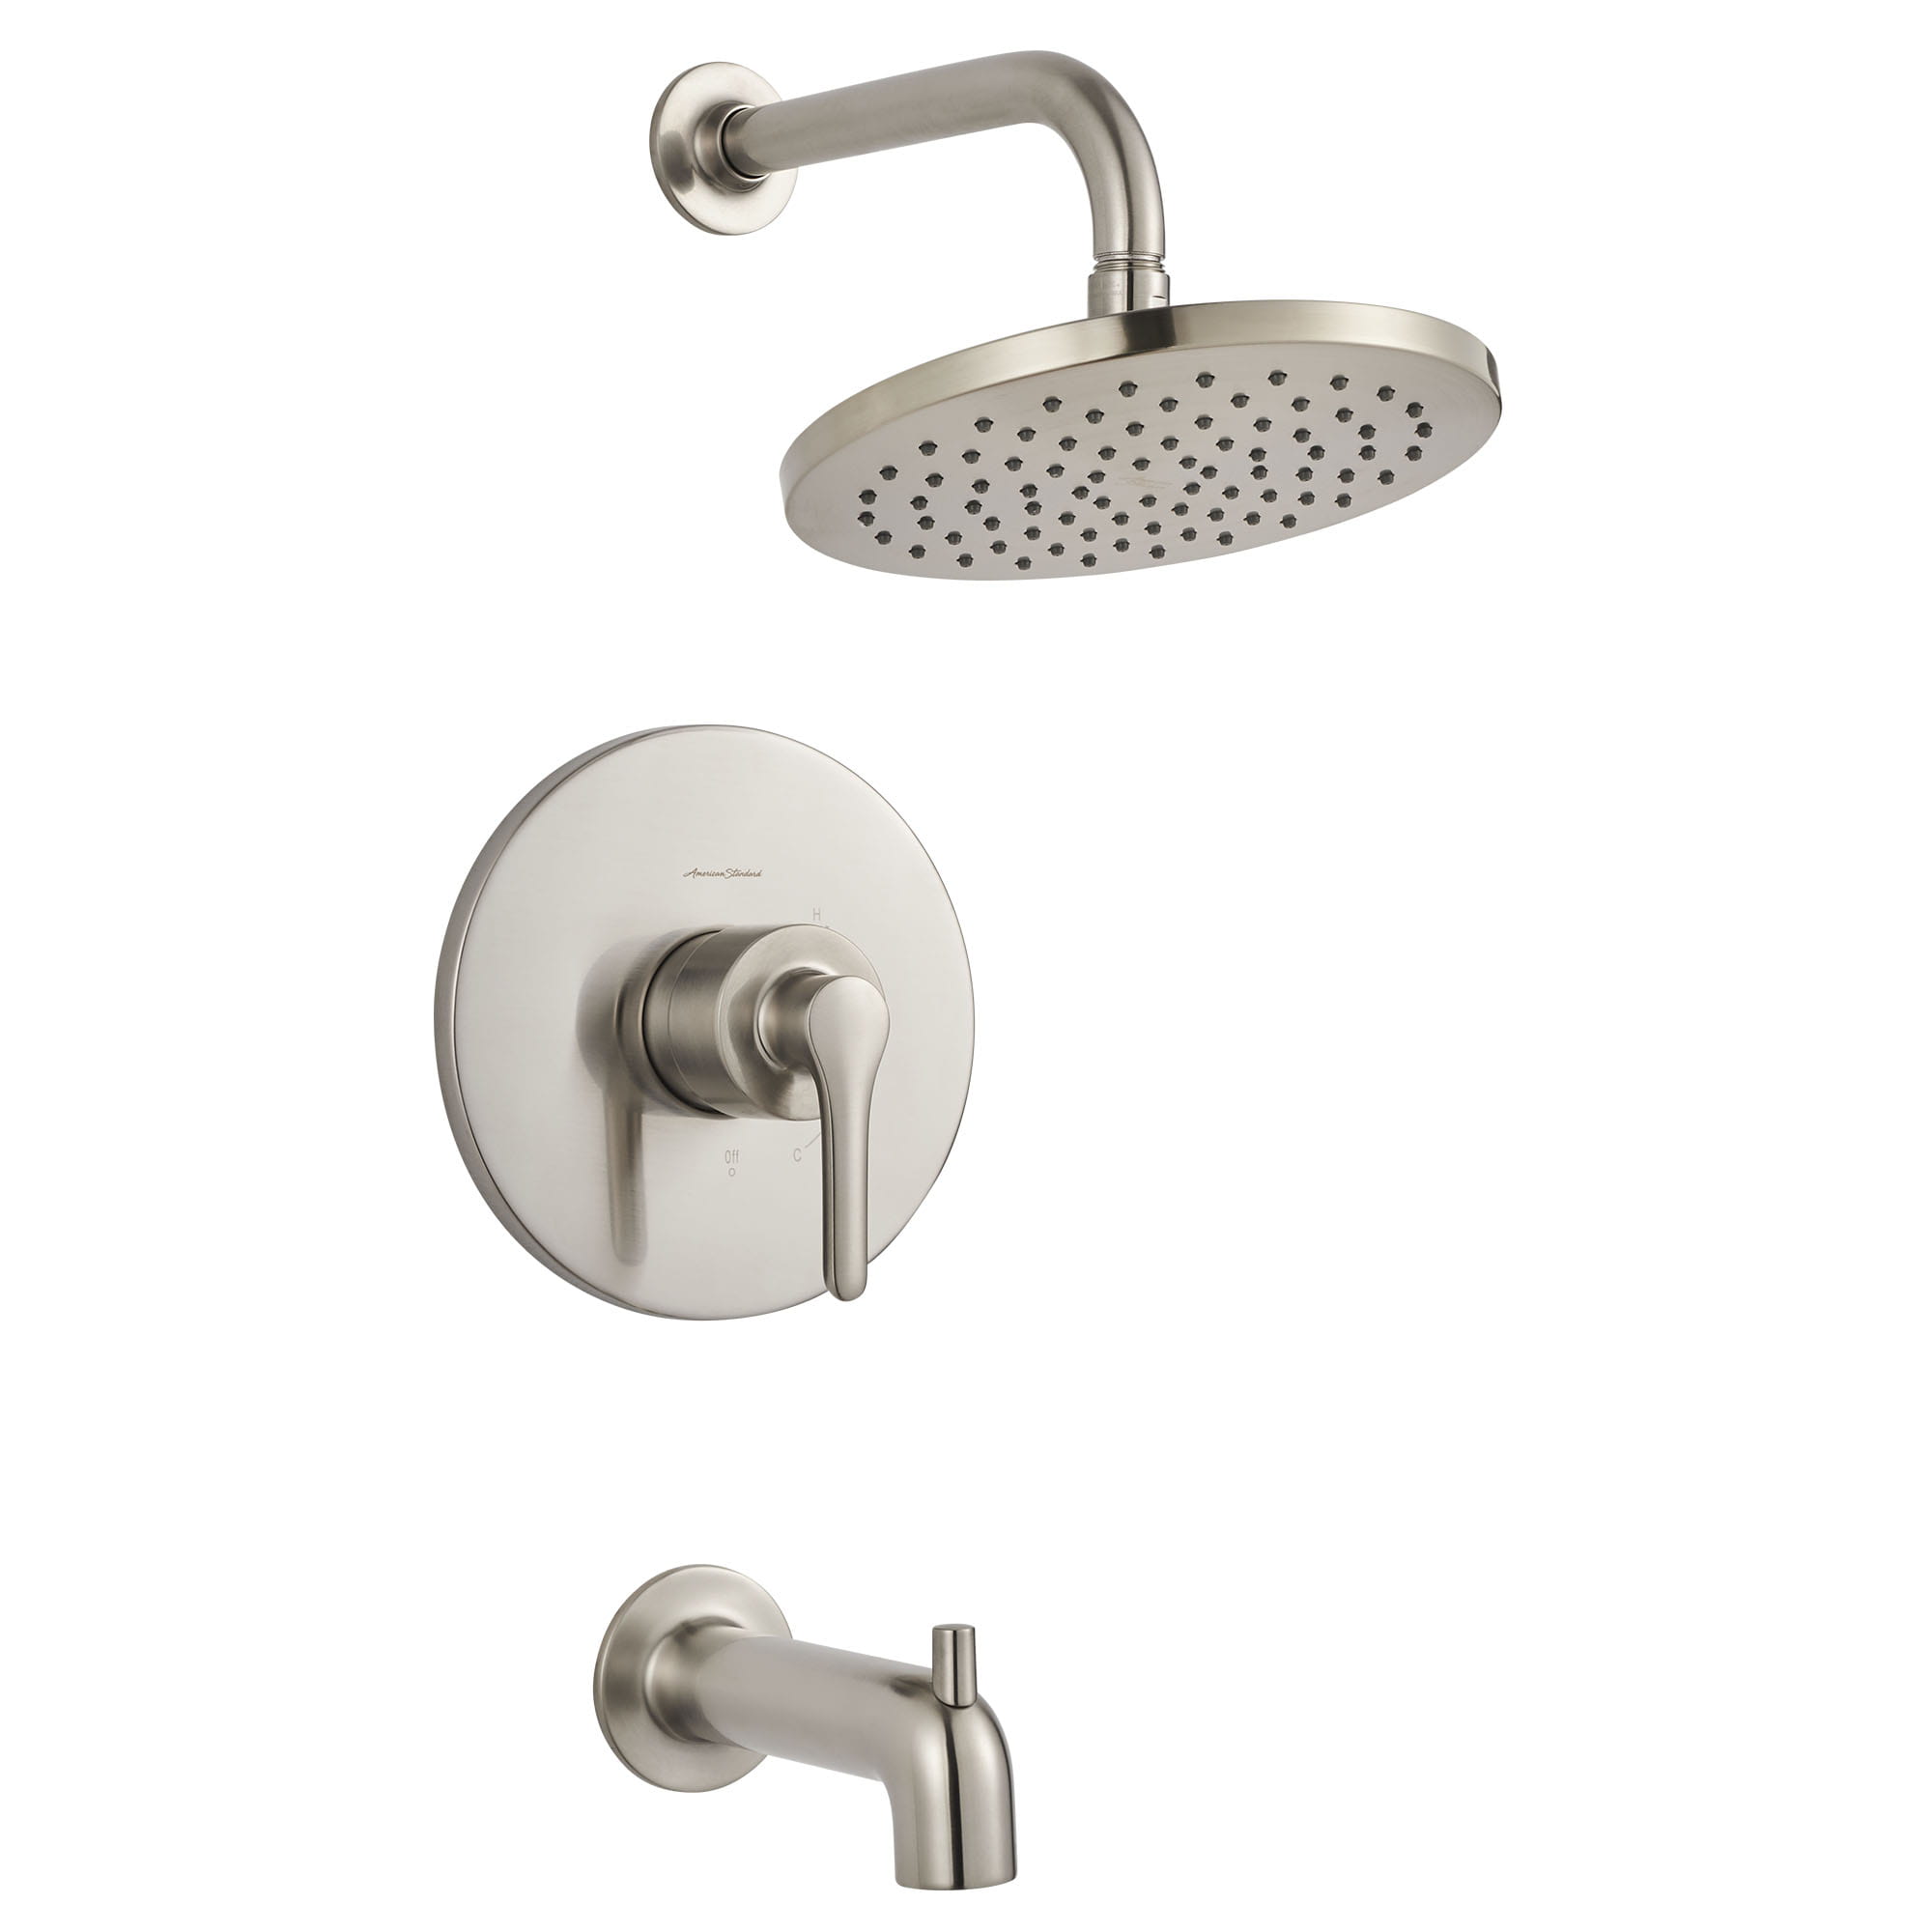 Studio® S 1.8 gpm/6.8 L/min Tub and Shower Trim Kit With Rain Showerhead, Double Ceramic Pressure Balance Cartridge With Lever Handle